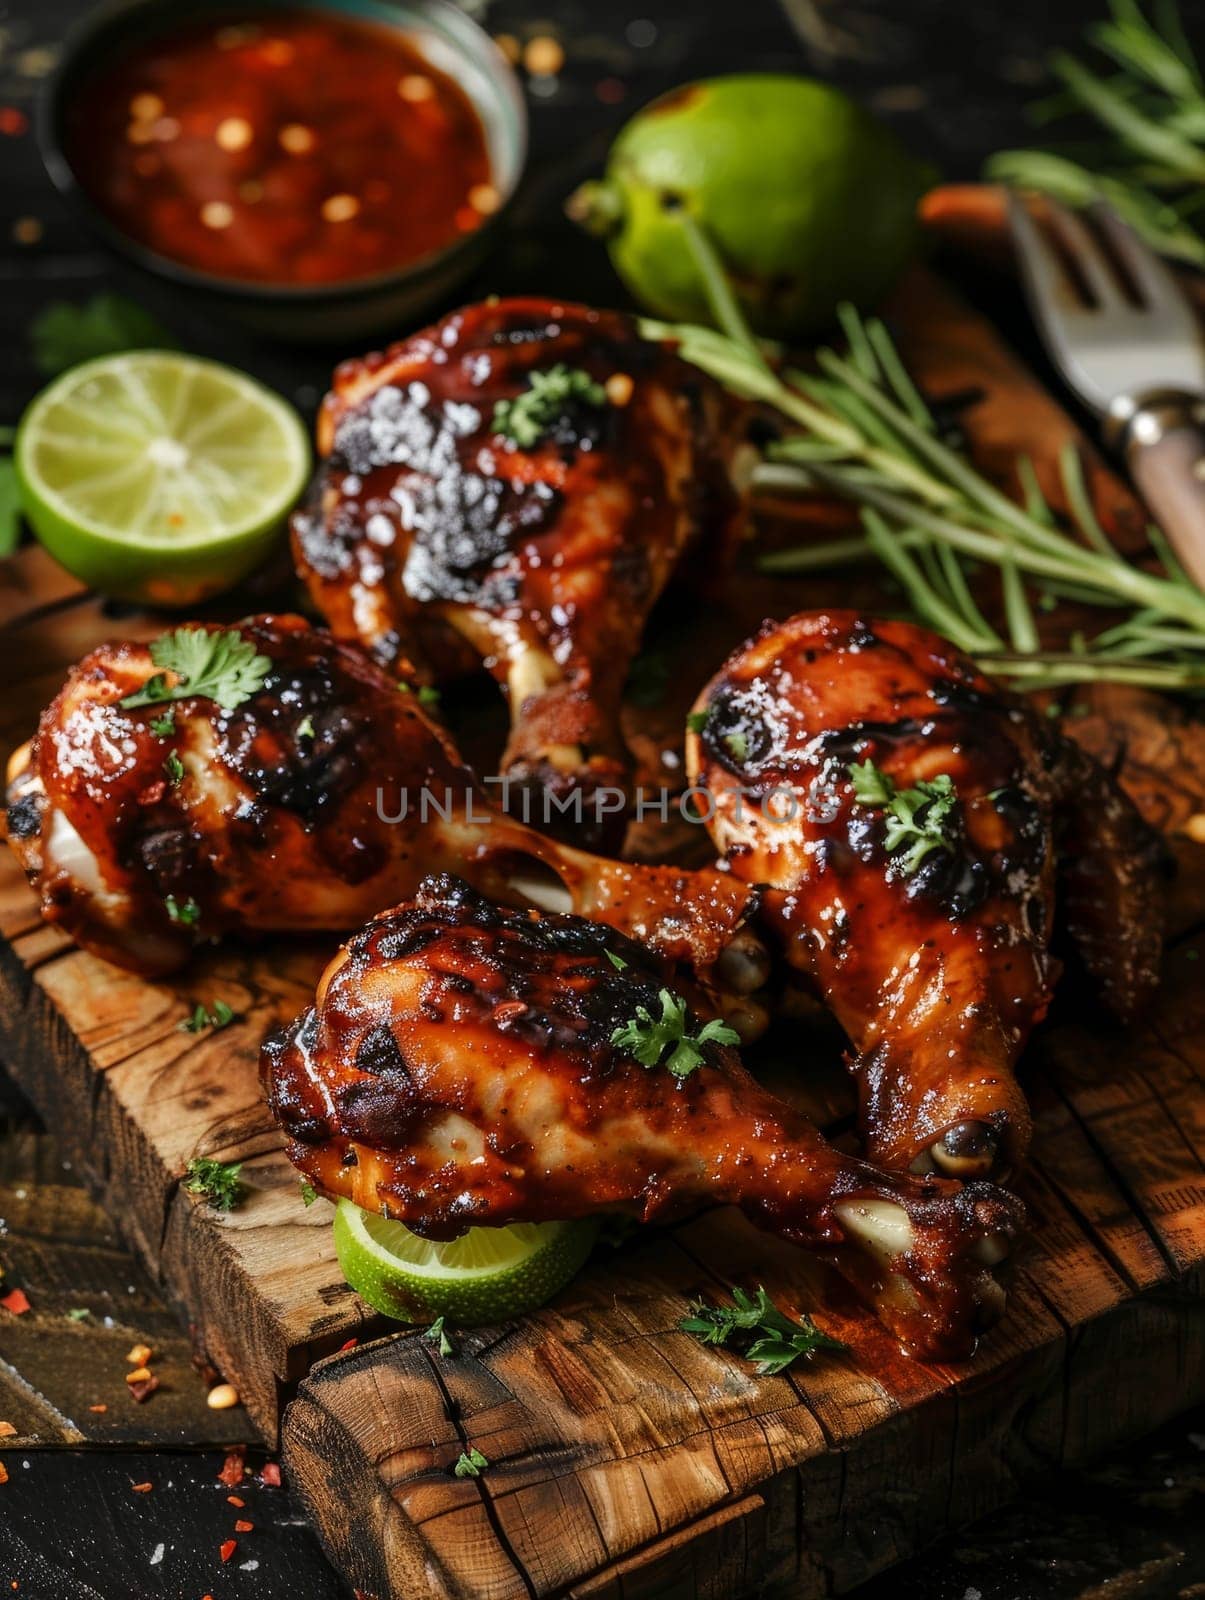 Jamaican jerk chicken, its flavors enhanced by a fiery seasoning blend, is grilled to perfection and served on a rustic wooden plank. Charred limes and a zesty sauce complete this vibrant taste